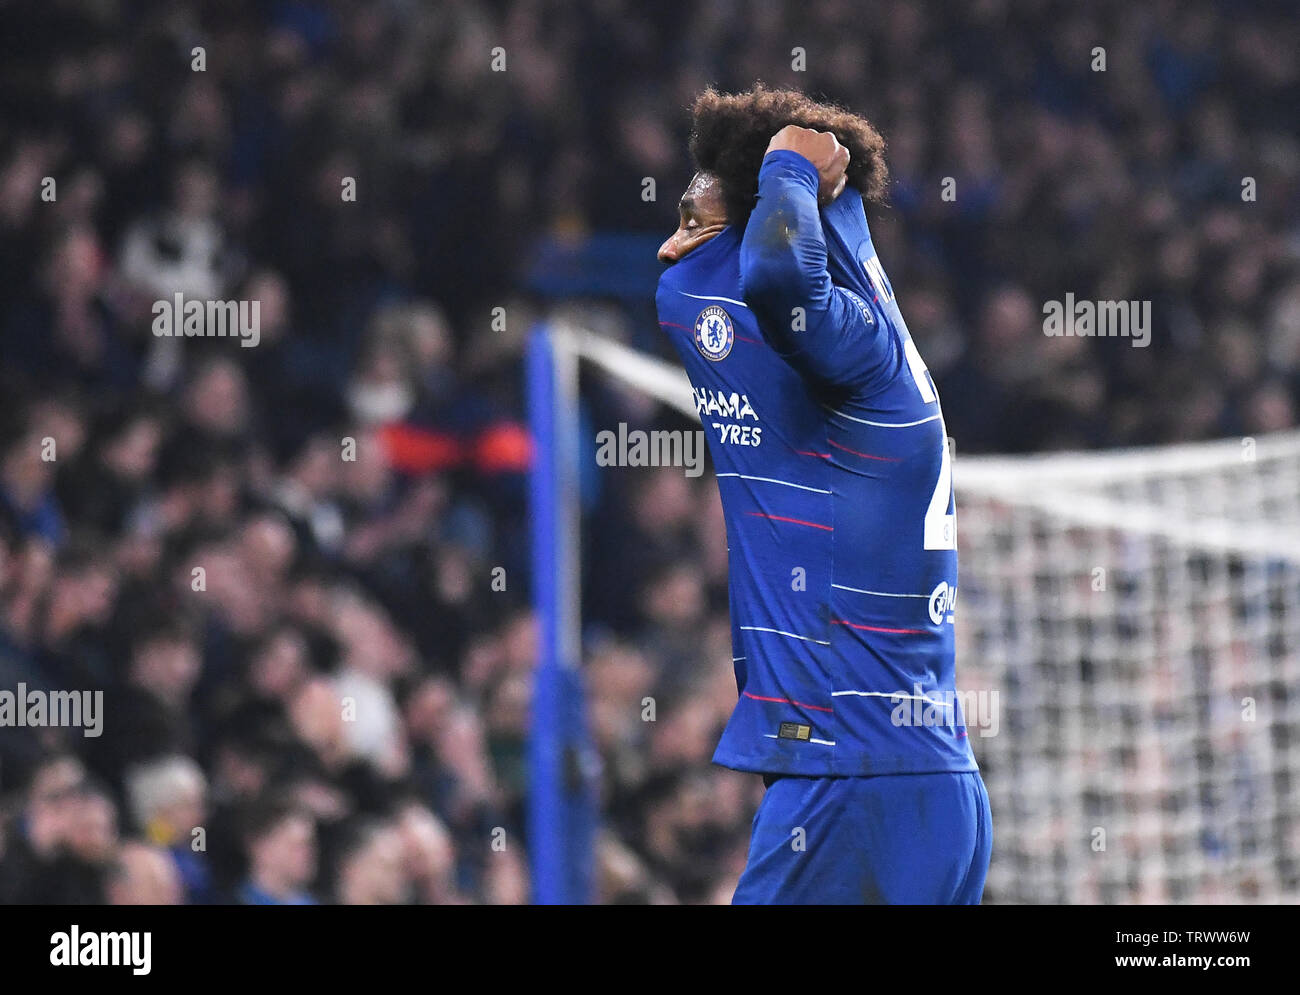 LONDON, ENGLAND - FEBRUARY 21, 2019: Willian Borges da Silva of Chelsea pictured after the second leg of the 2018/19 UEFA Europa League Round of 32 game between Chelsea FC (England) and Malmo FF (Sweden) at Stamford Bridge. Stock Photo